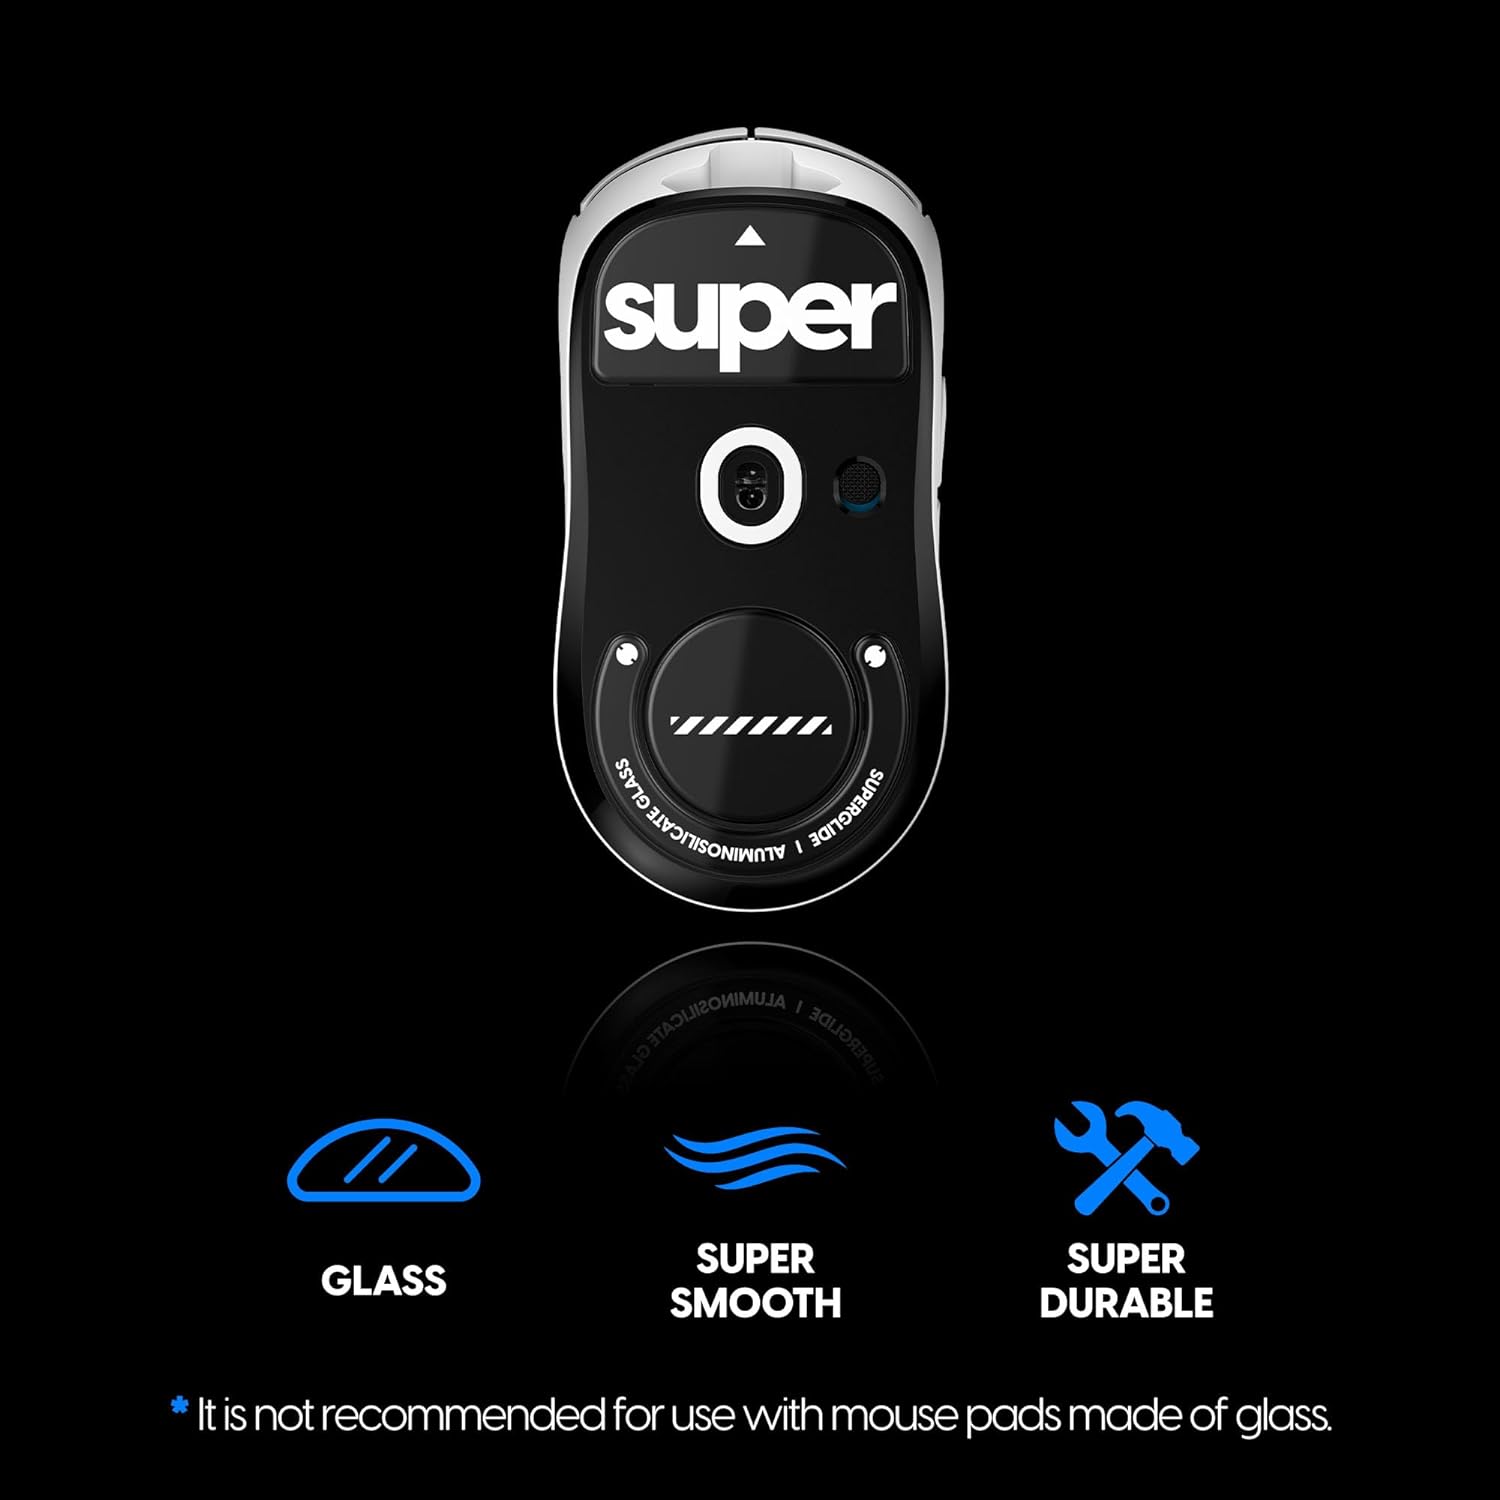 A large marketing image providing additional information about the product Pulsar Superglide 2 Mouse Skate for Logitech G Pro X Superlight - Black - Additional alt info not provided